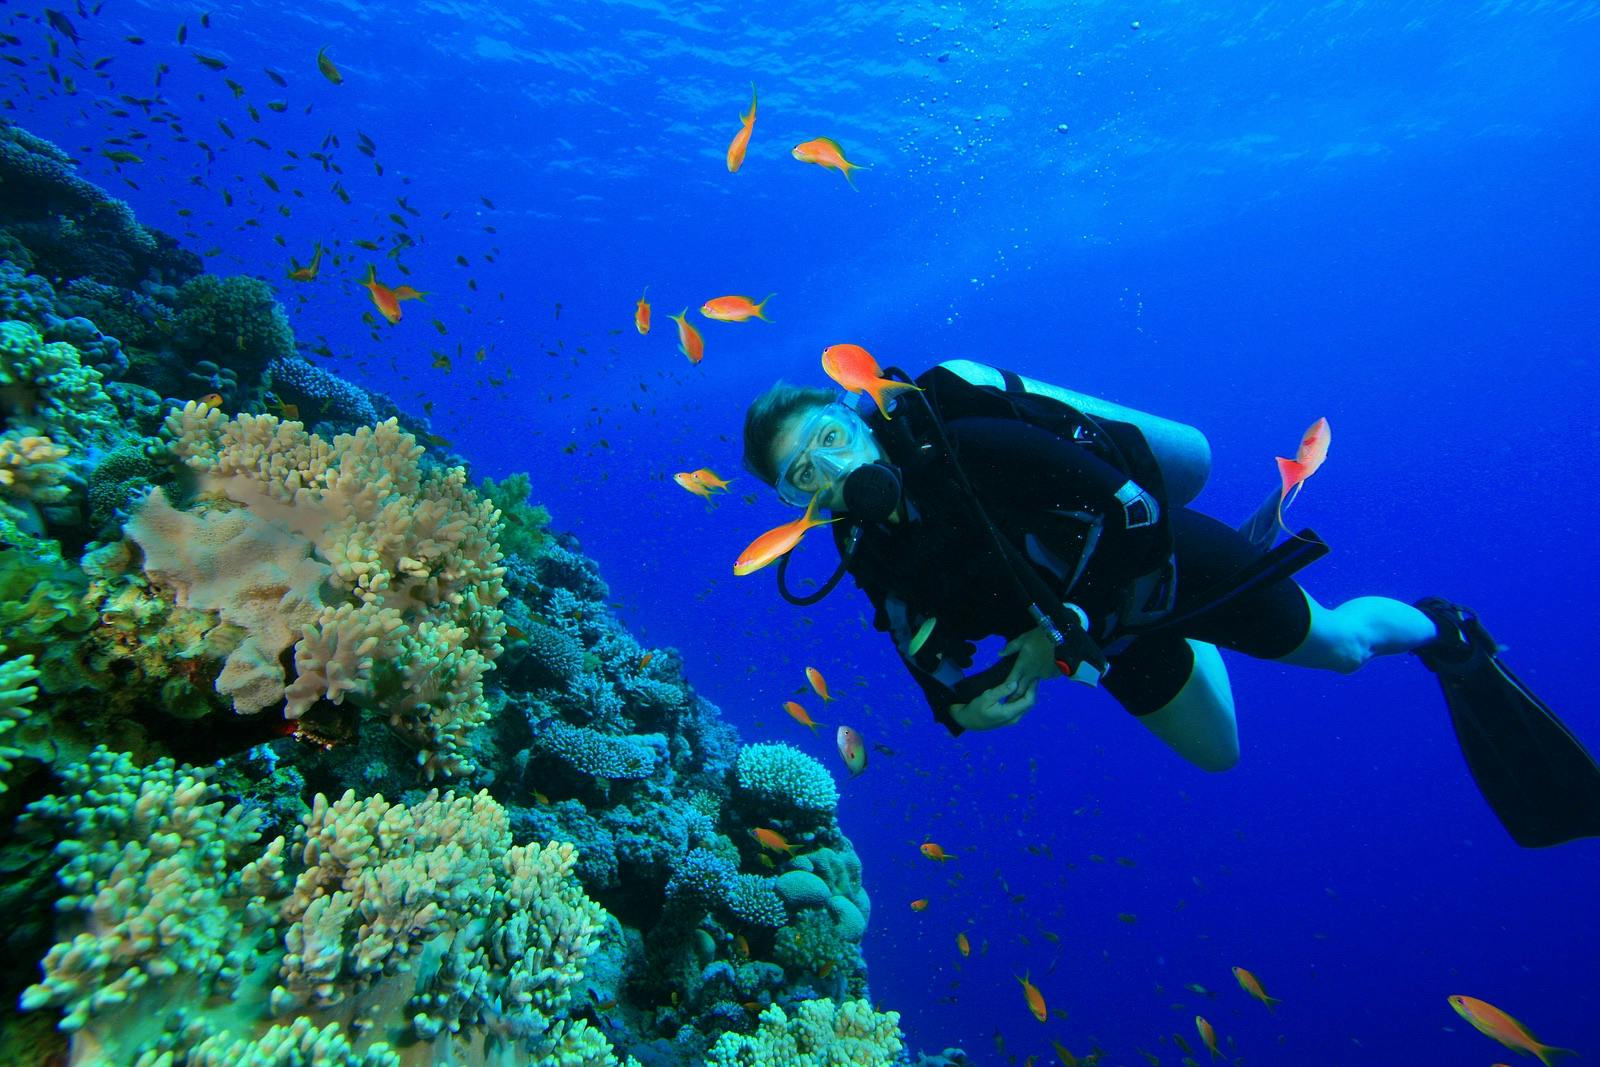 Young Woman Scuba Diver on coral reef in clear blue water
